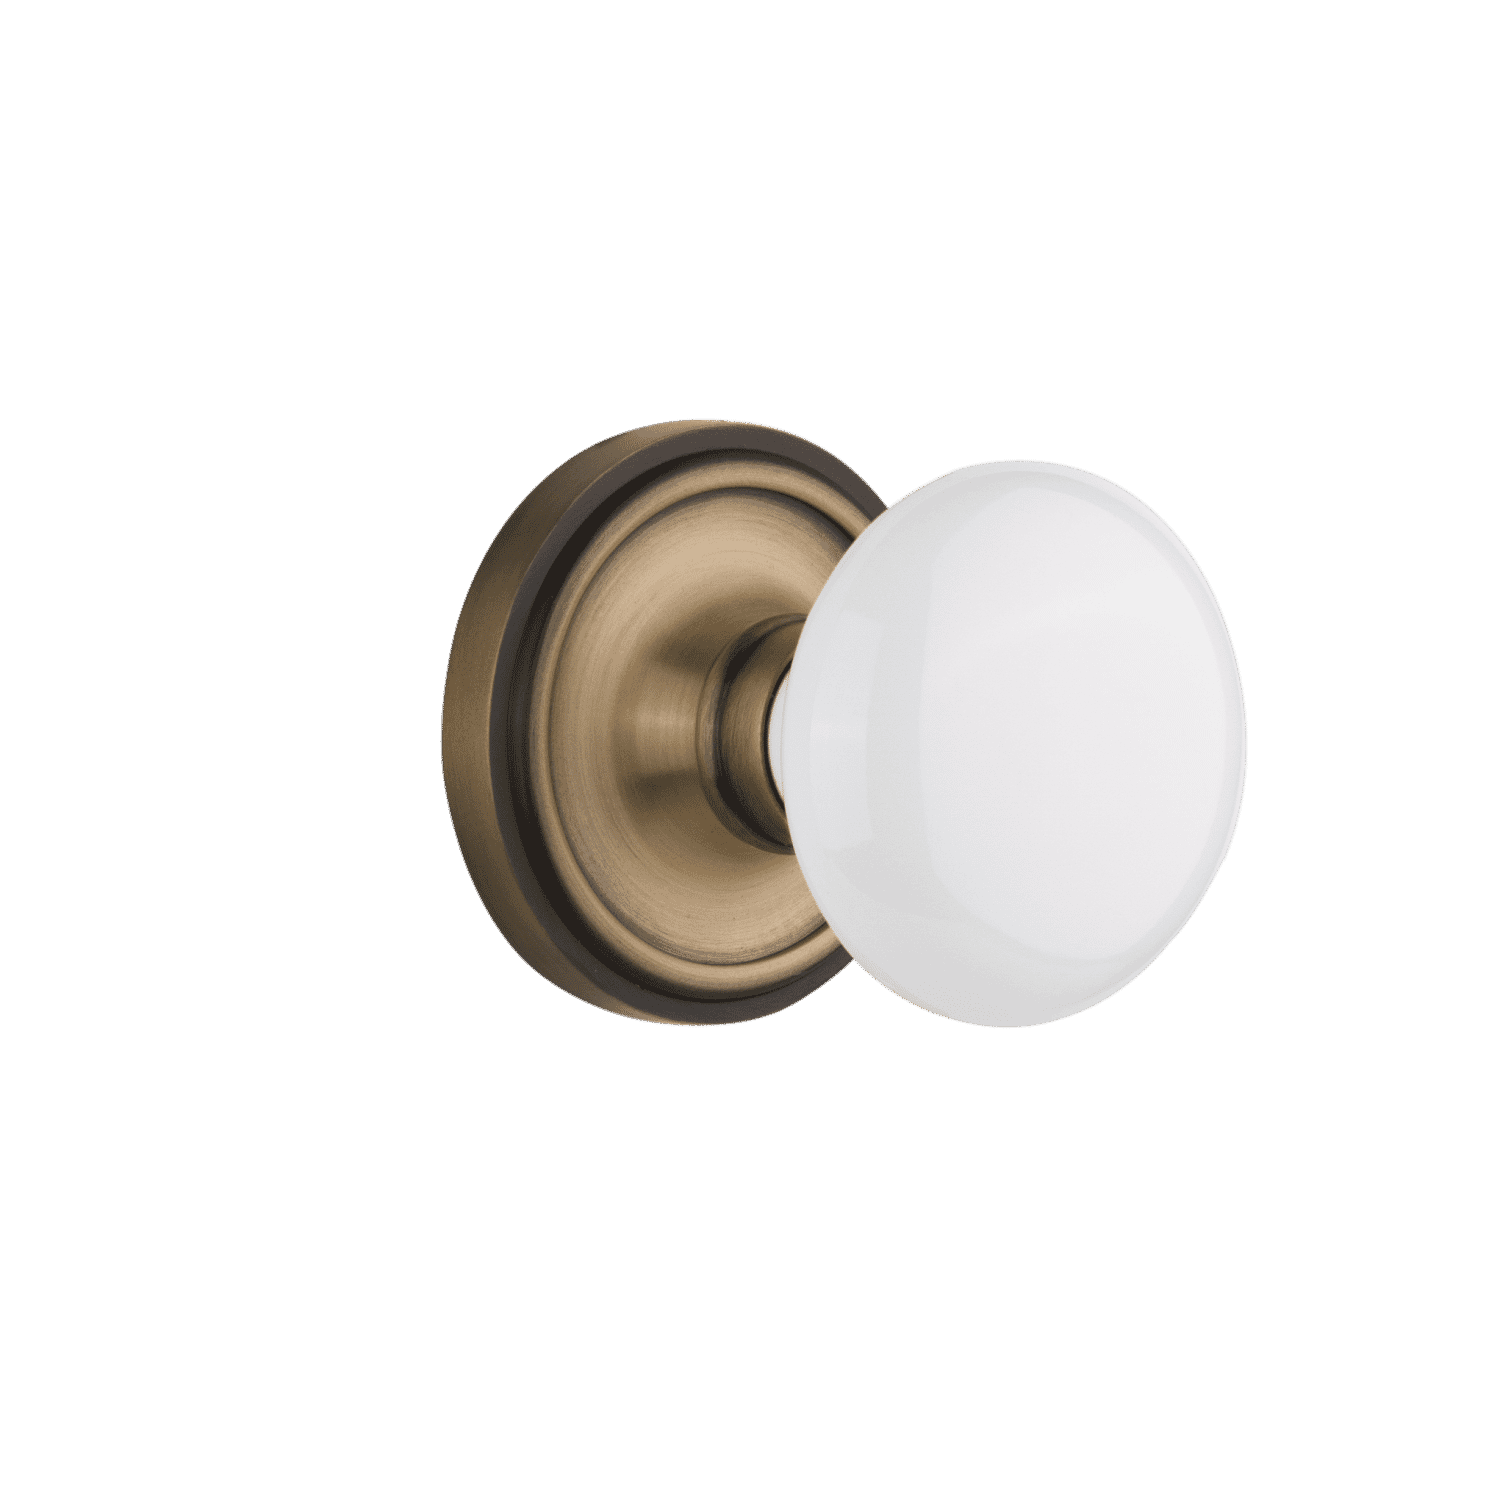 Classic Rosette with White Porcelain Knob in Antique Brass